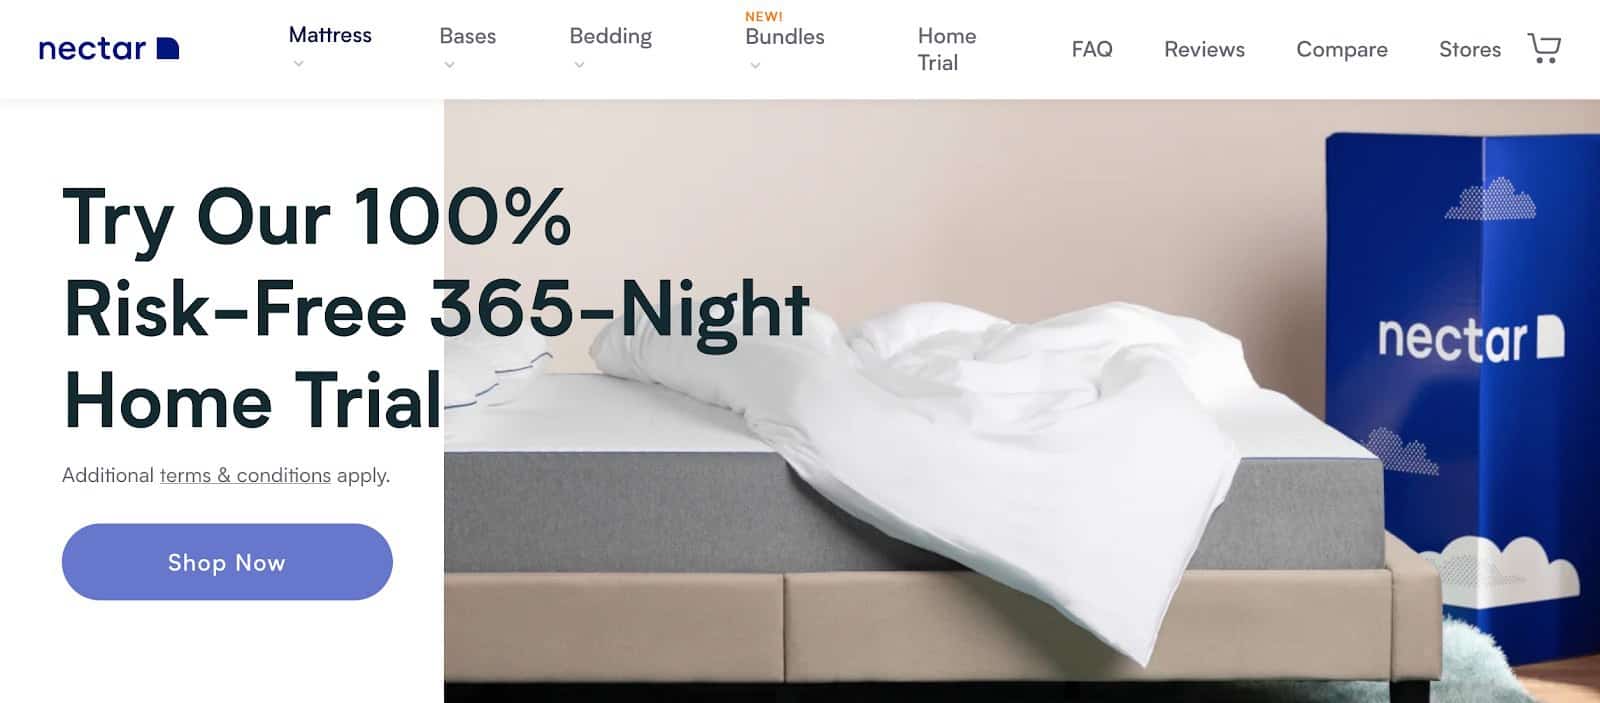 Nectar mattresses | Collaboration opportunities as featured on Afluencer